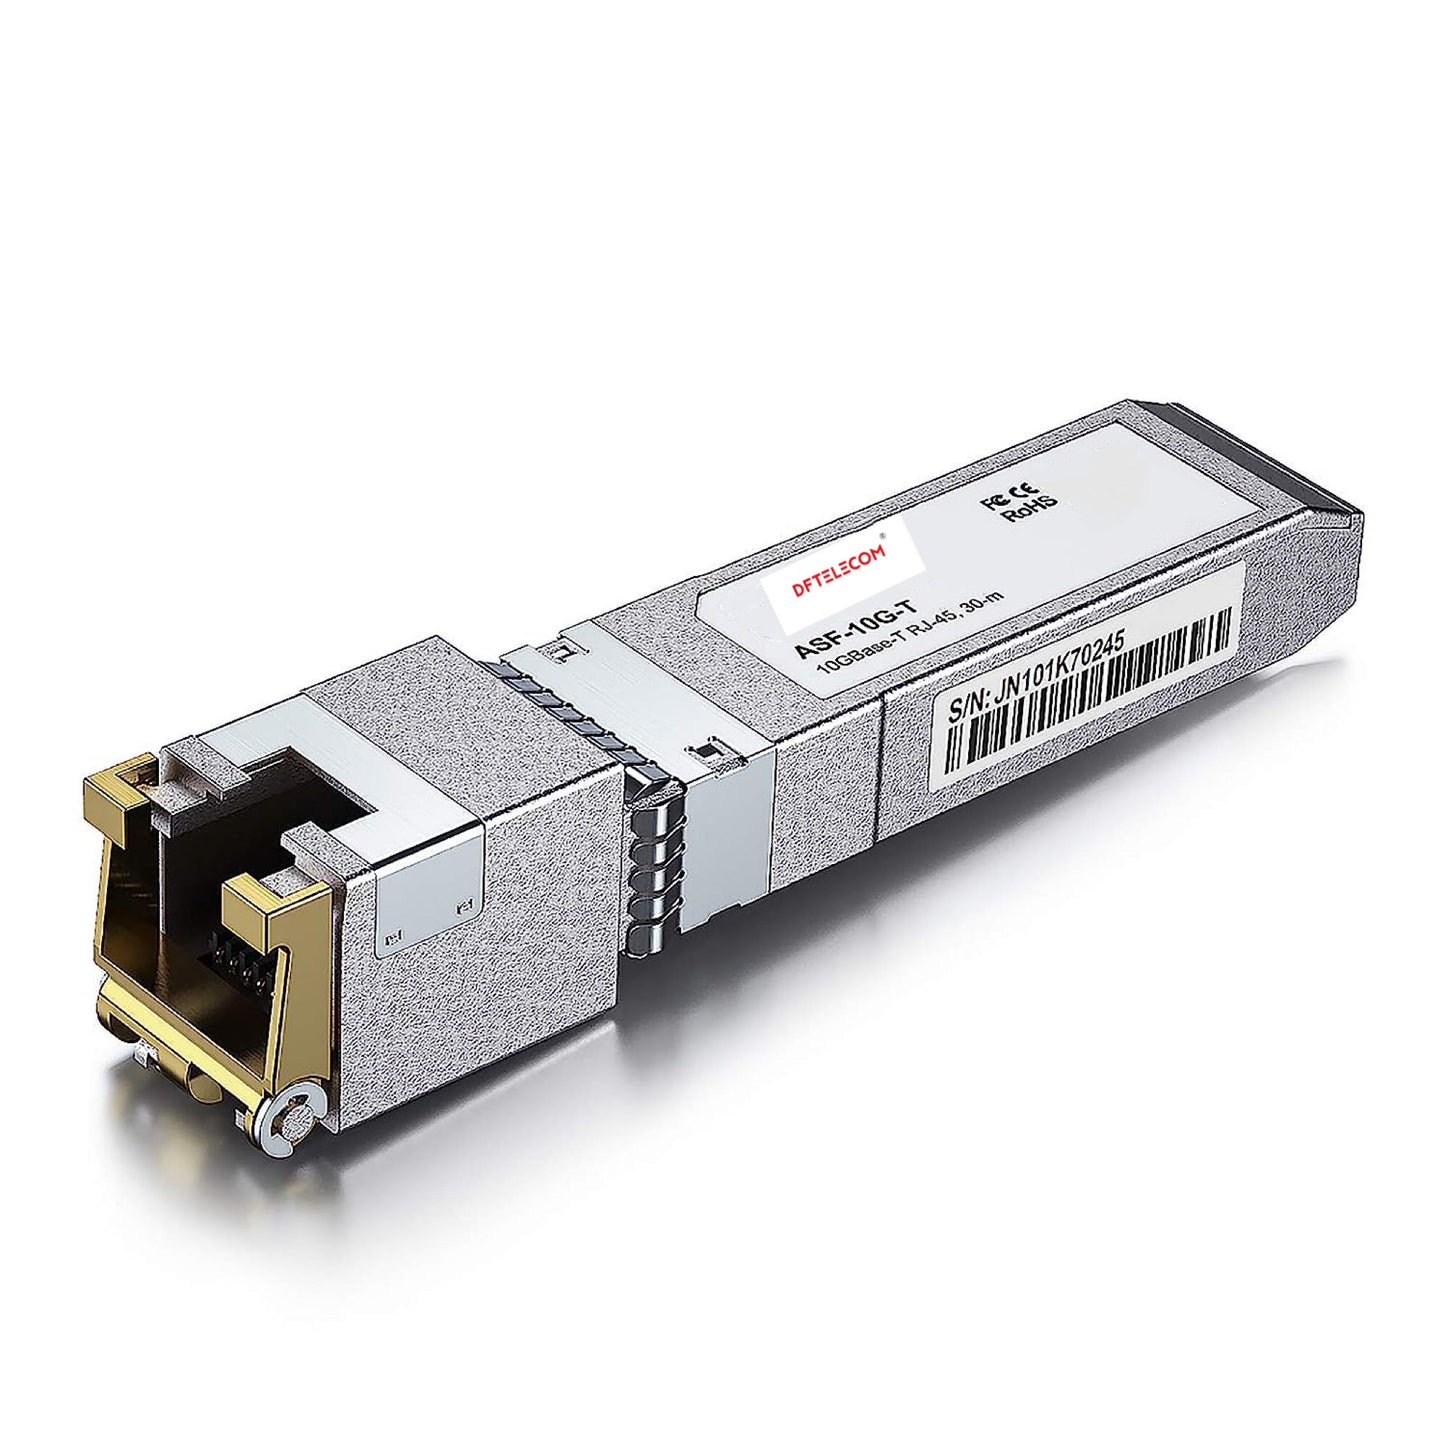 10GBase-T SFP+ to RJ-45 Transceiver, 10Gbe SFP+ Copper Ethernet CAT6a Module, up to 30-Meter, for Cisco SFP-10G-T-S, Meraki, Ubiquiti UniFi UF-RJ45-10G, Fortinet, Netgear, TP-Link TL-SM5310-T and More